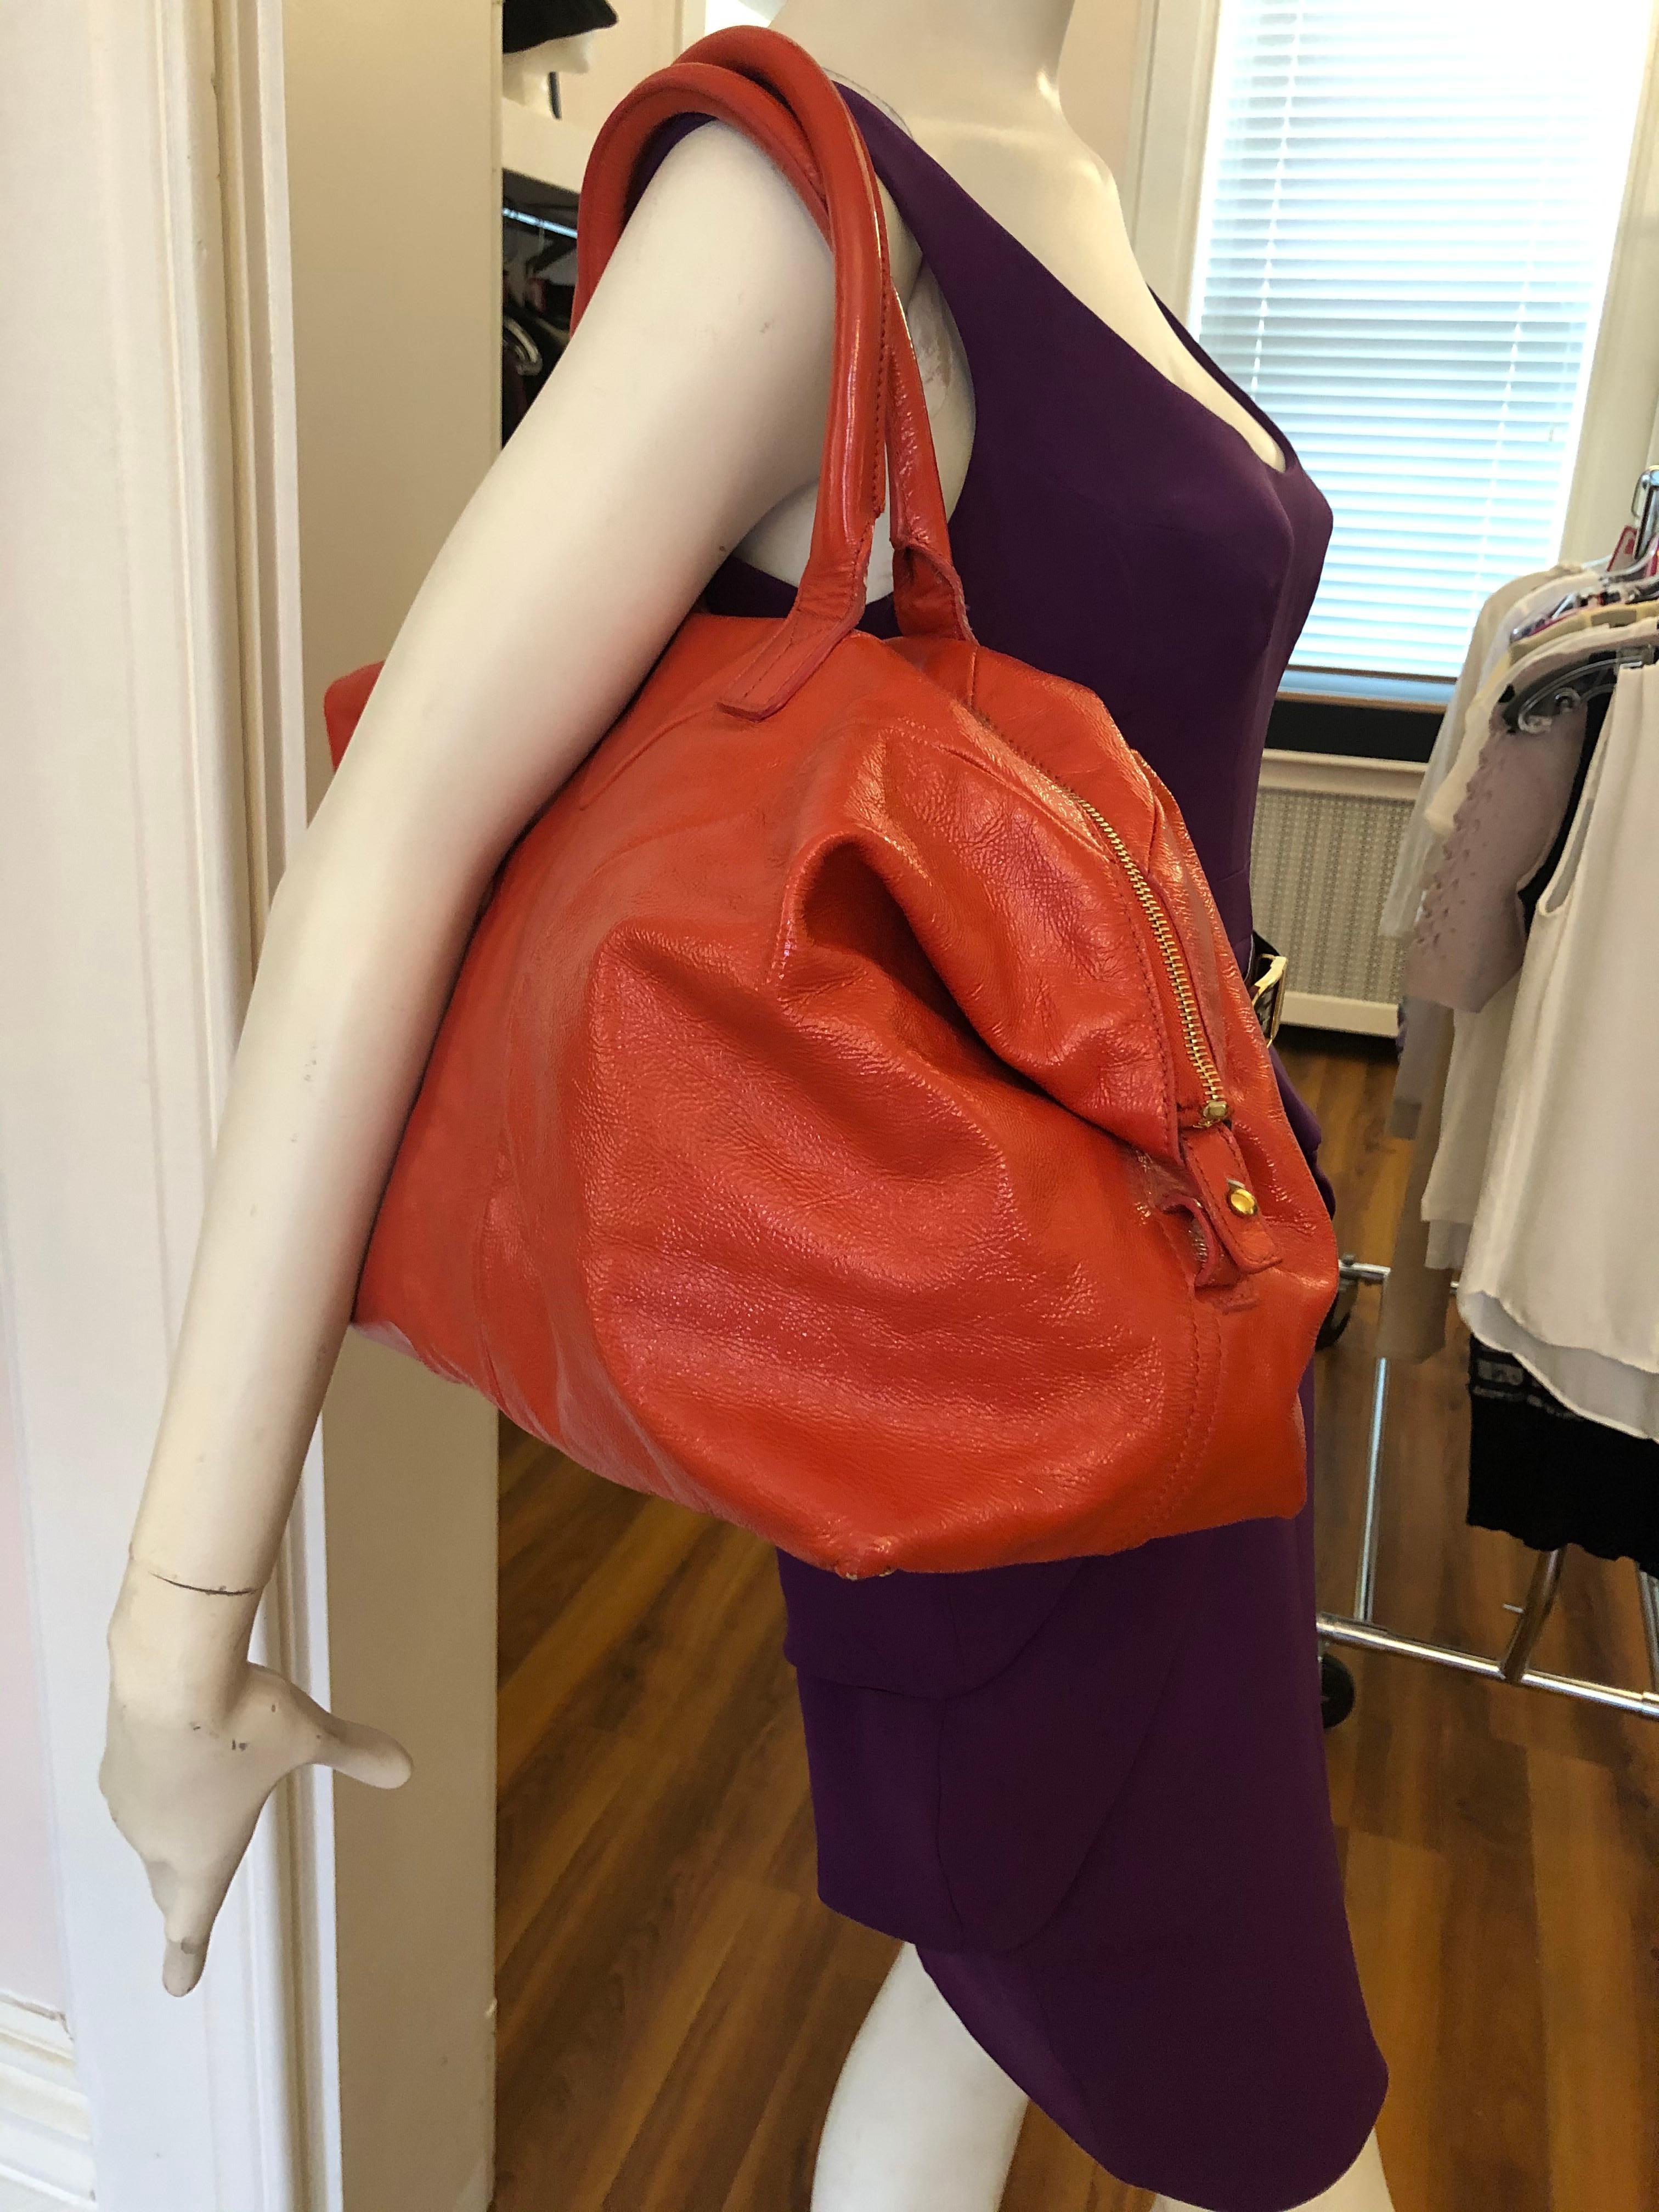 This is a nice size bag with gold tone hardware, and two ways to use as per pictures.
The bag is in very good condition, with a zipped closure; one zipped pocket on the lining, and two smaller open pockets, also on the lining.
The serial# is